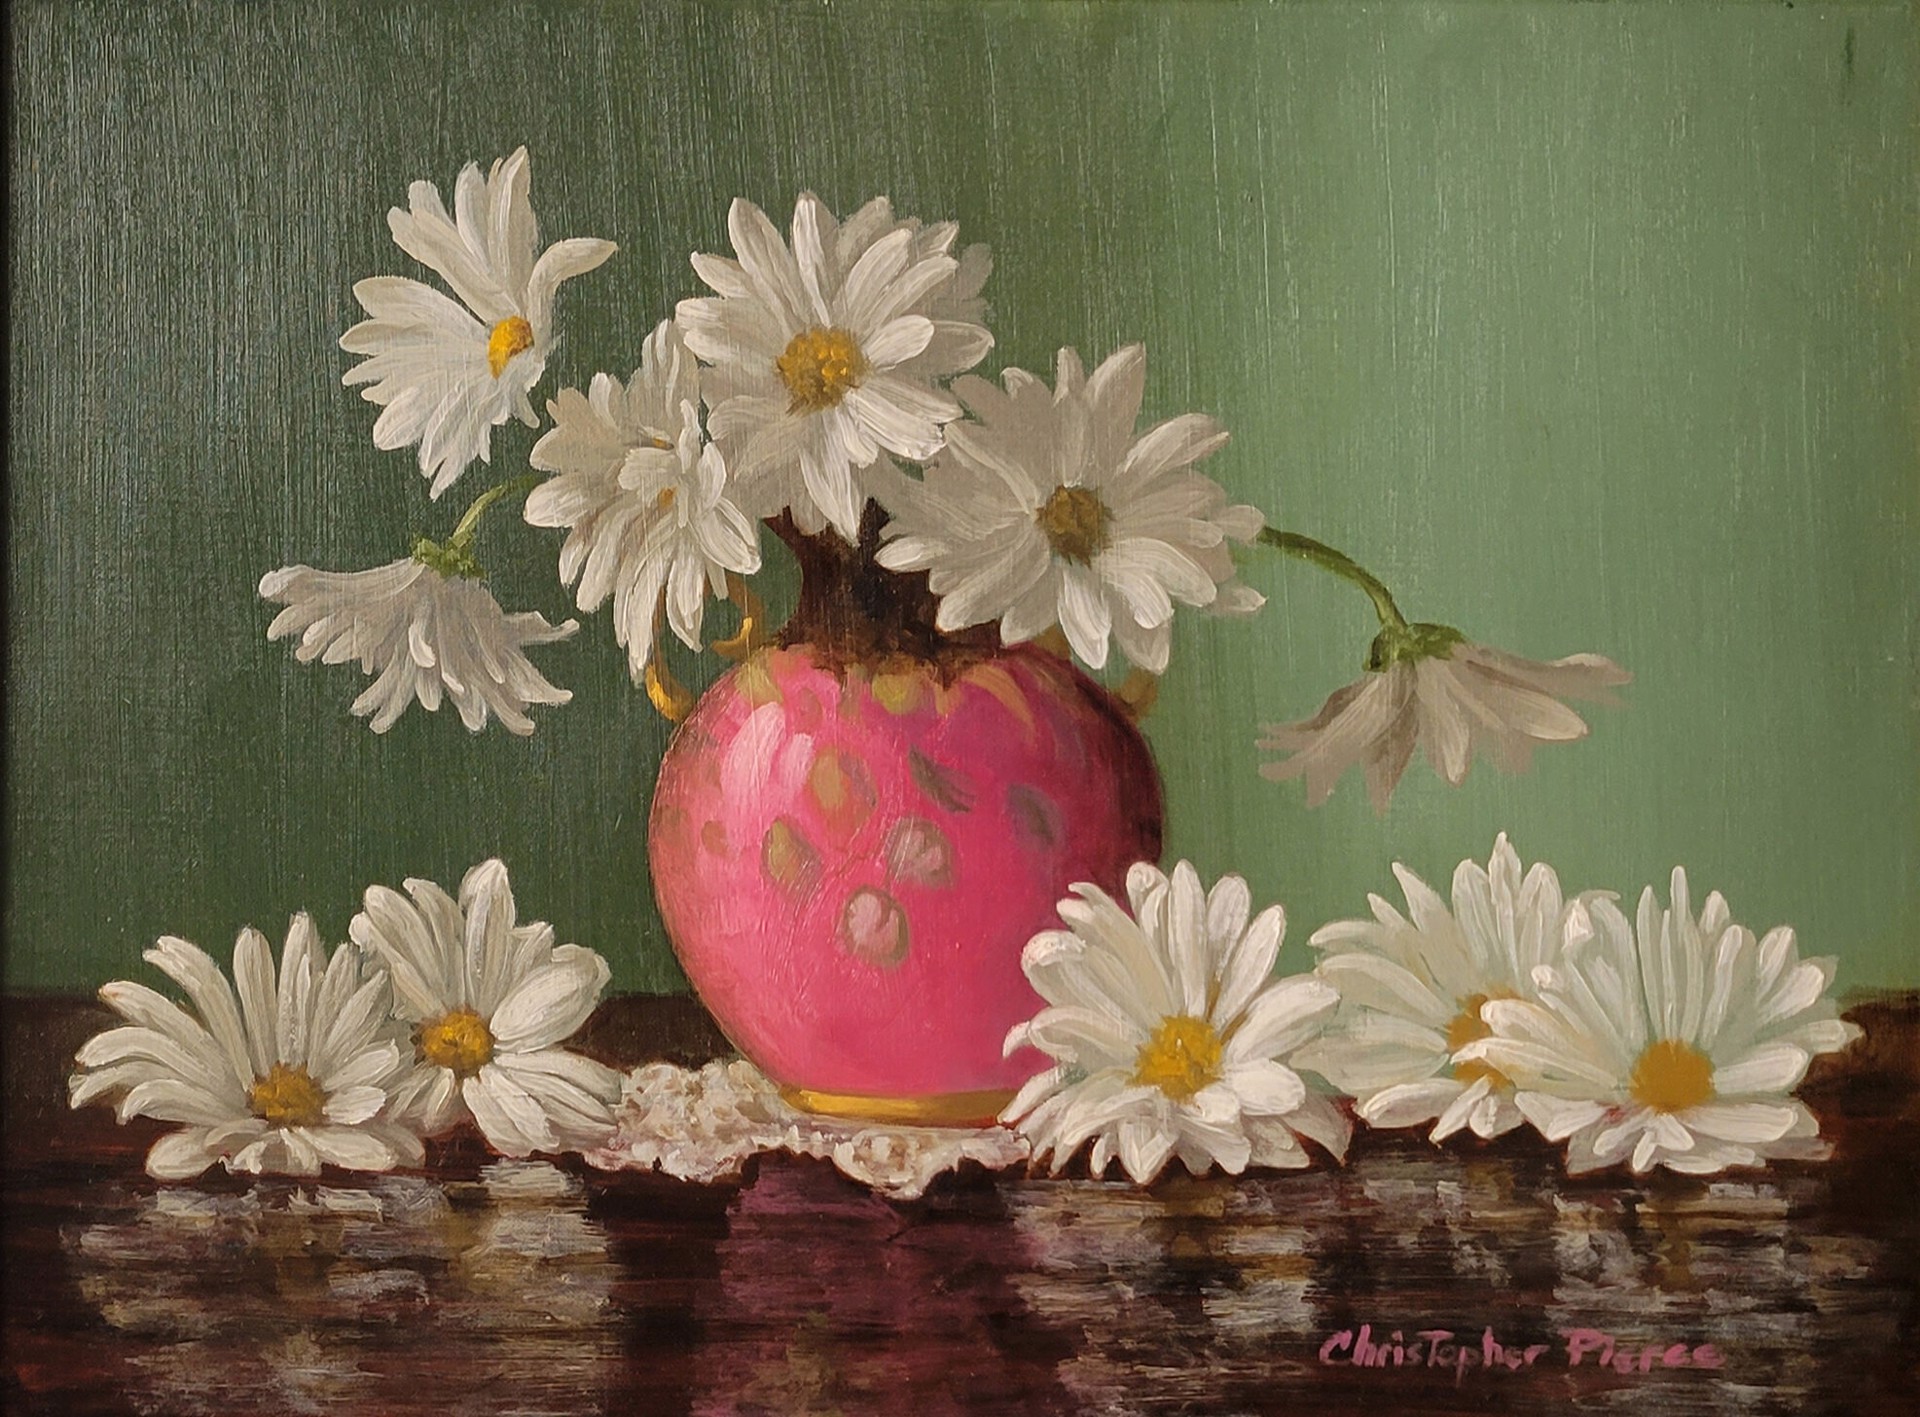 Pink Vase and Daisies by Christopher Pierce